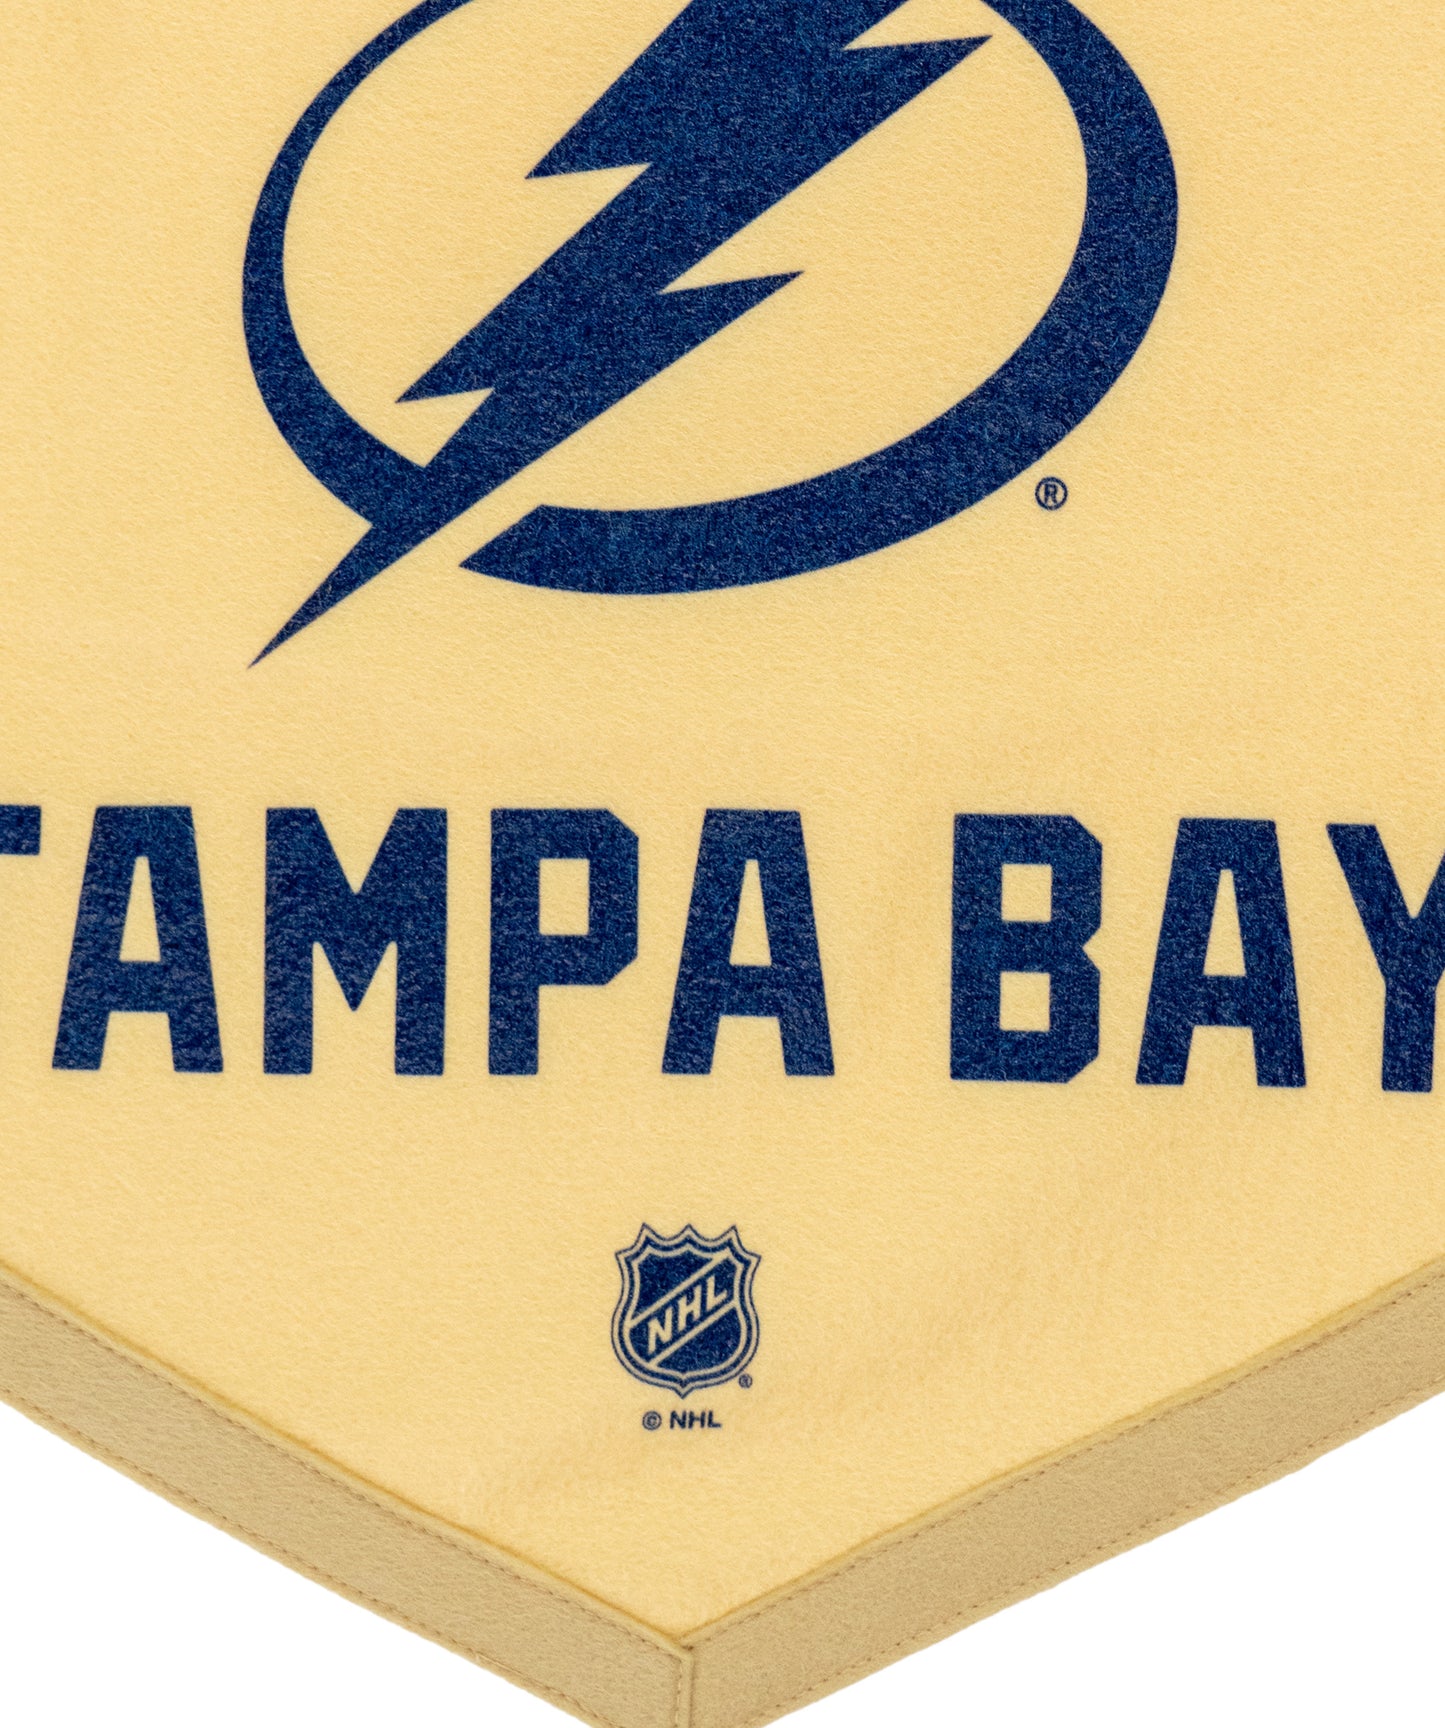 Made In Tampa Bay: Tampa Bay Lightning Camp Flag • NHL x Oxford Pennant